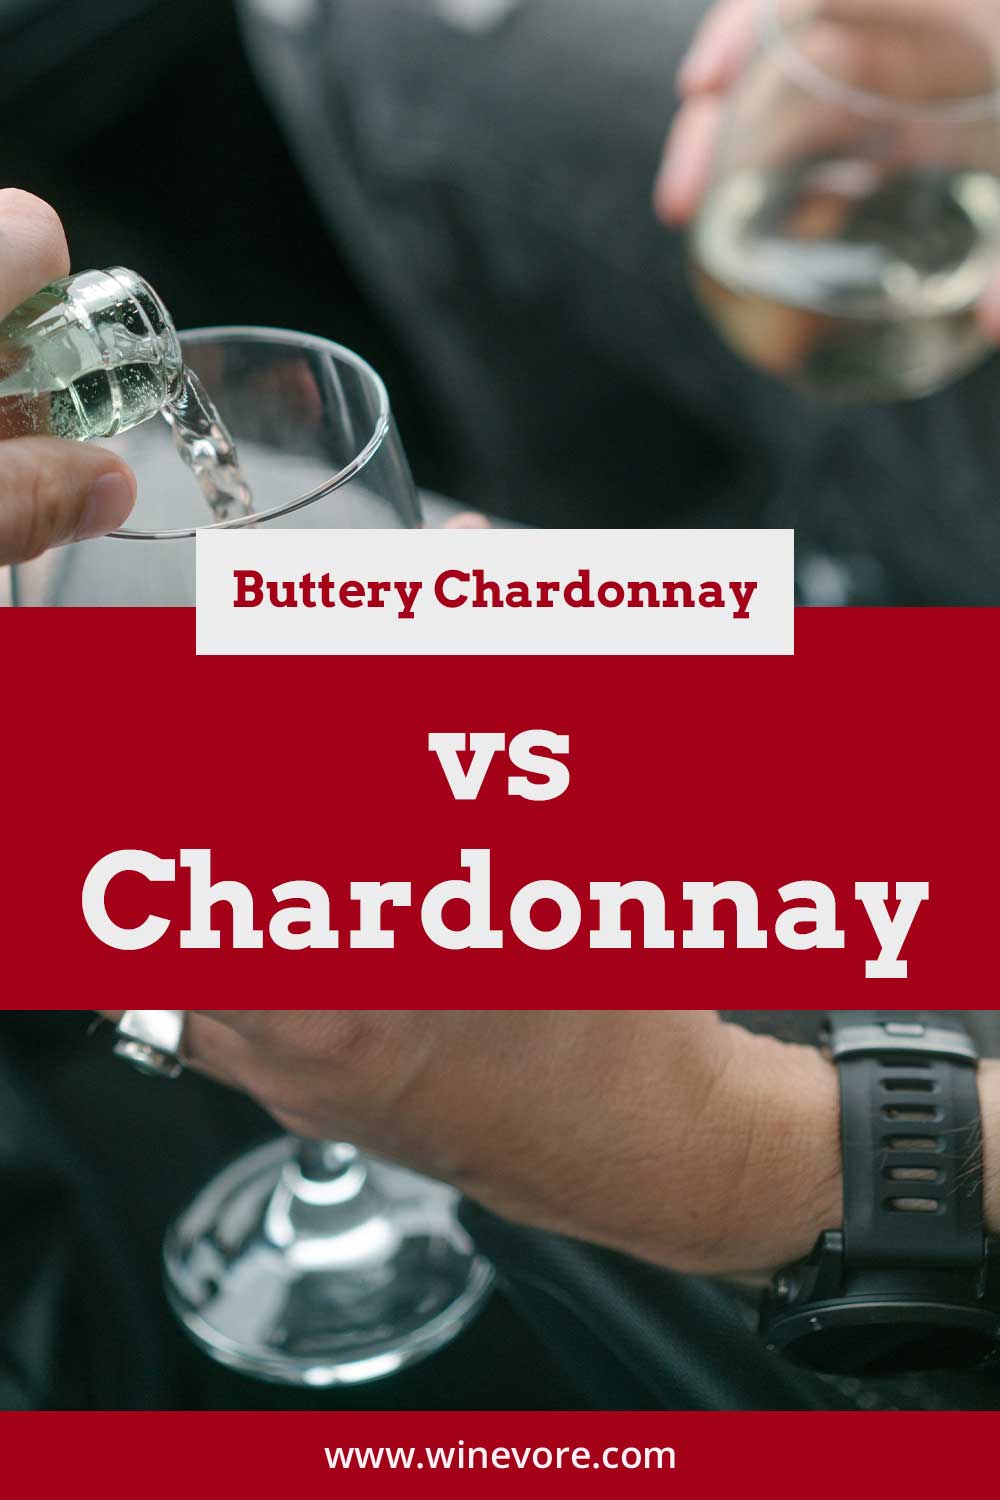 Pouring white wine into a glass - Buttery Chardonnay vs Chardonnay.